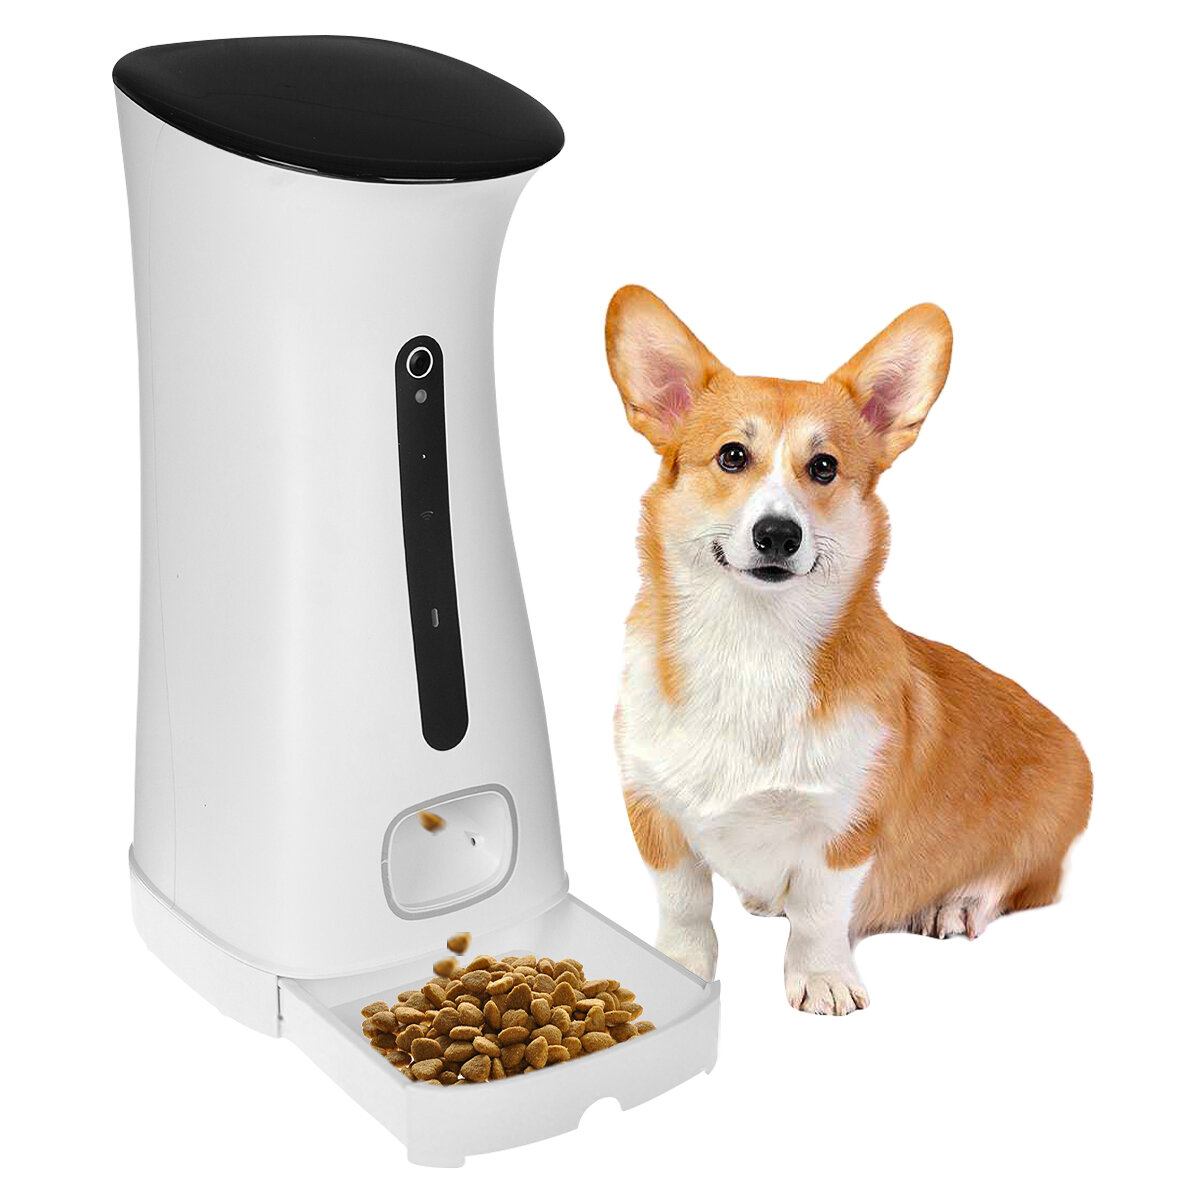 Image of 75L Pet Feeder APP control Remote Voice Interaction Intelligent with Night Vision Function Puppy Cat Dog Supplies Autom